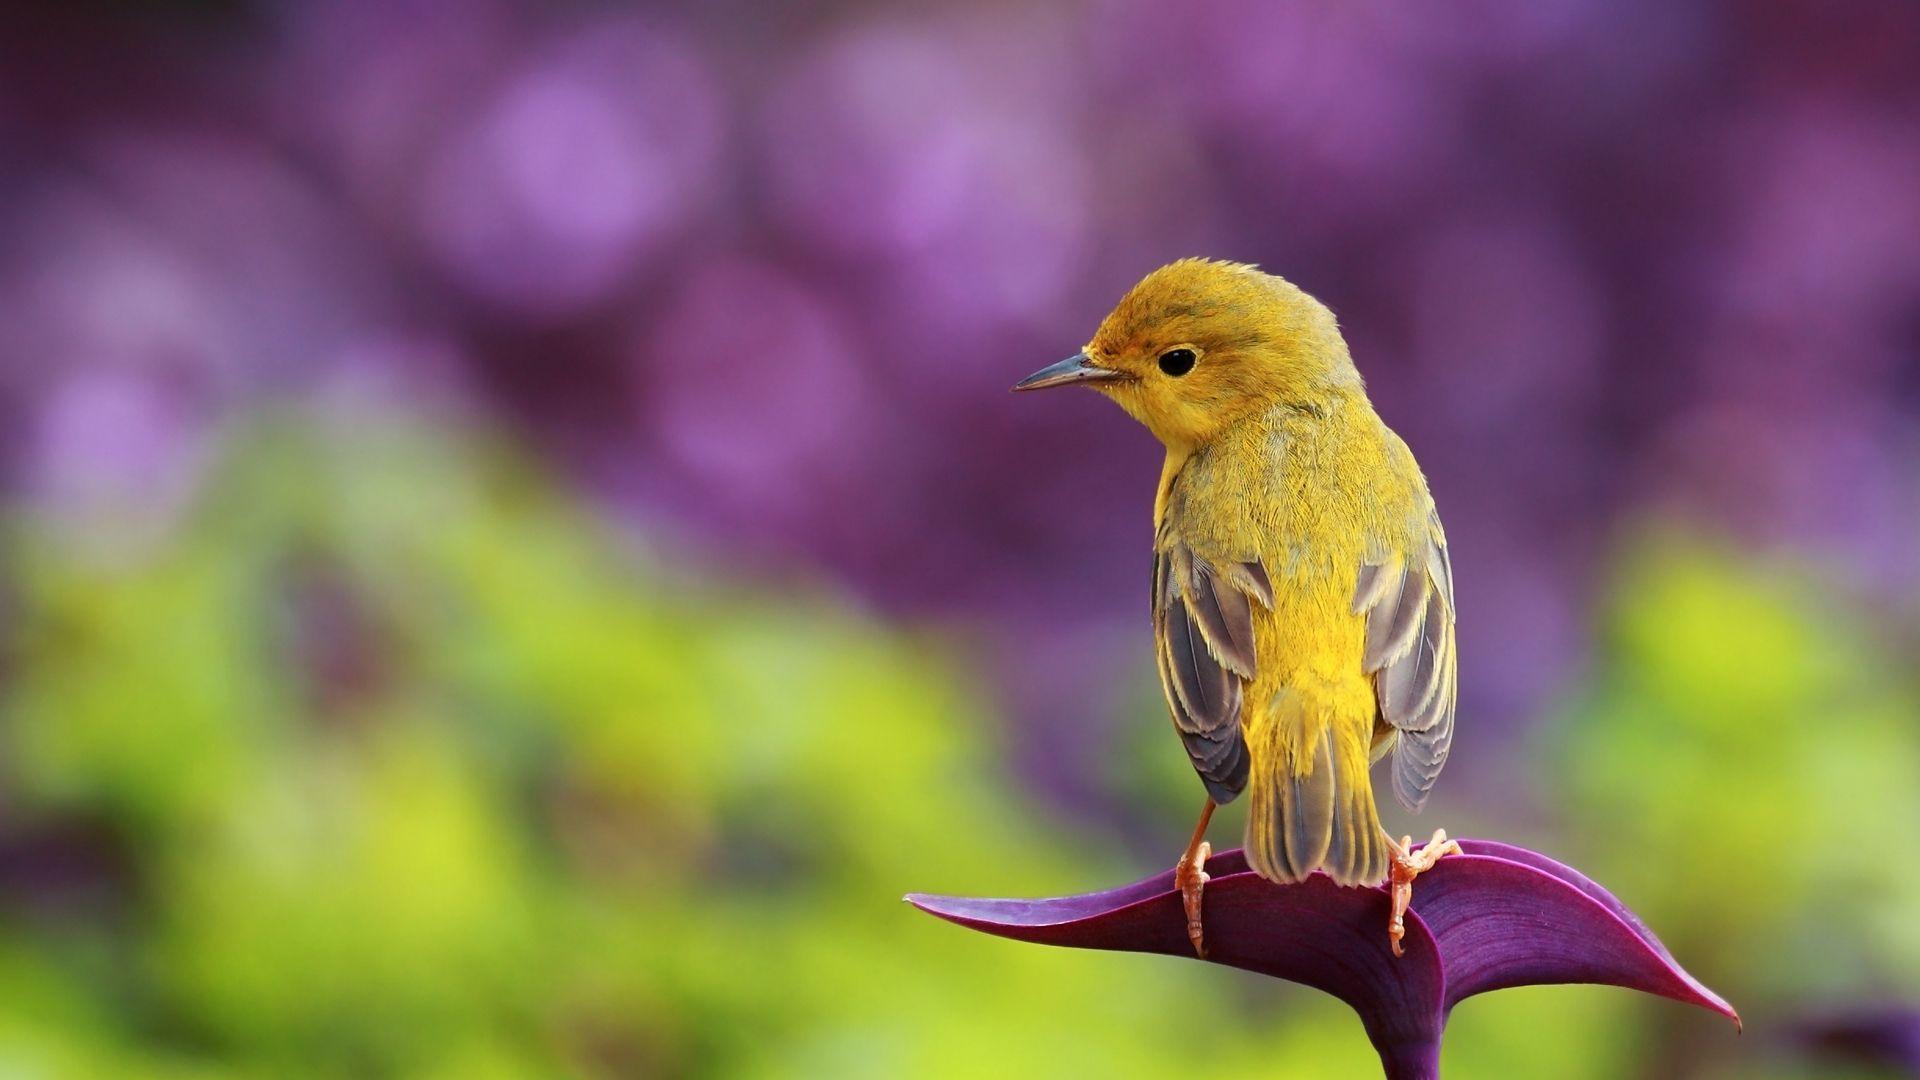 Beautiful Birds and Flowers Wallpapers Free Download 1920x1080